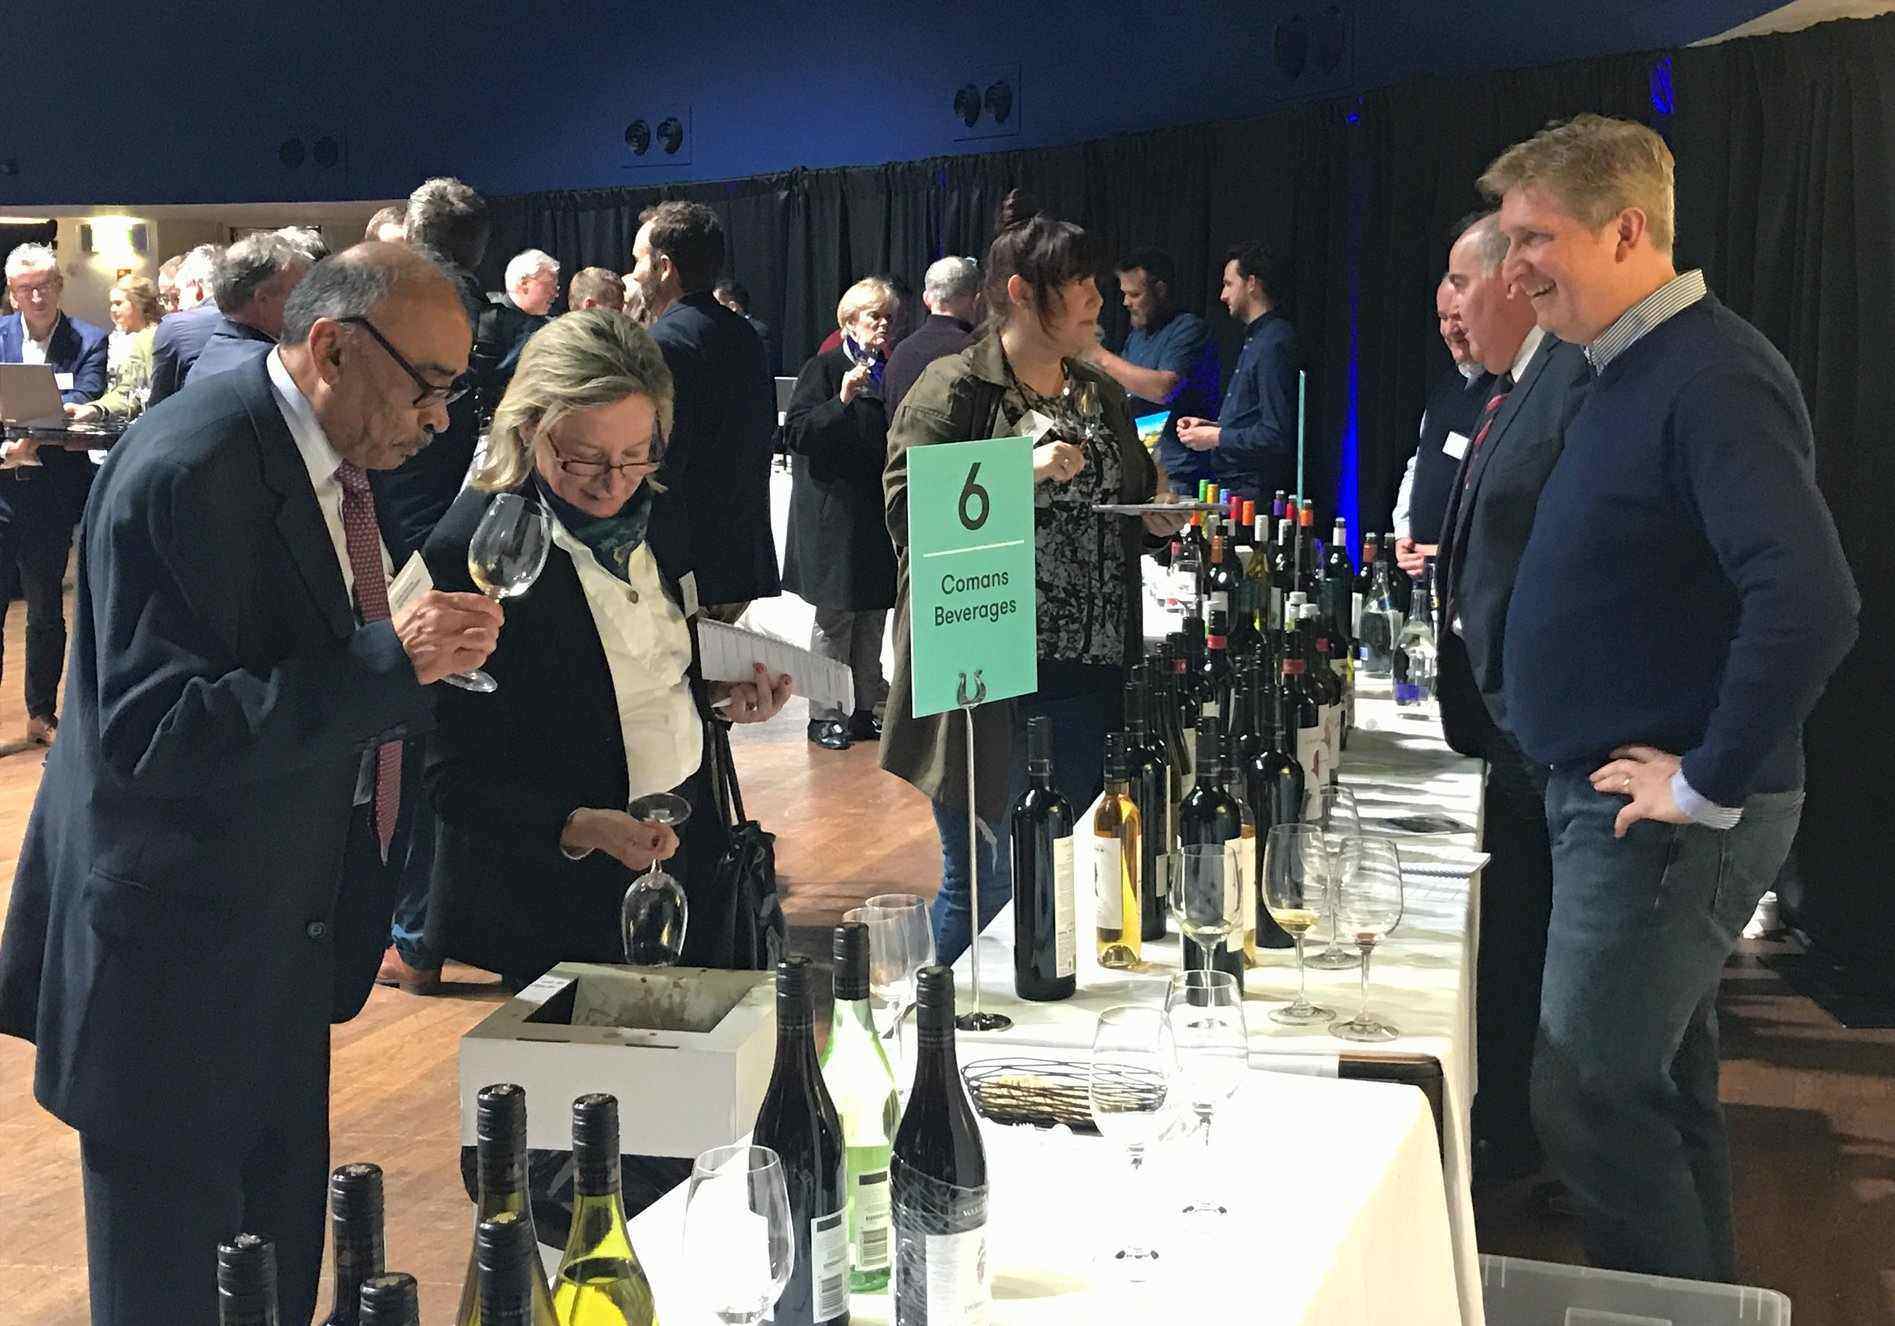 Overall hosts Wine Australia were very pleased by the broad reach of trade who attended including many importers interested in the wineries seeking representation and the off-licence owners.